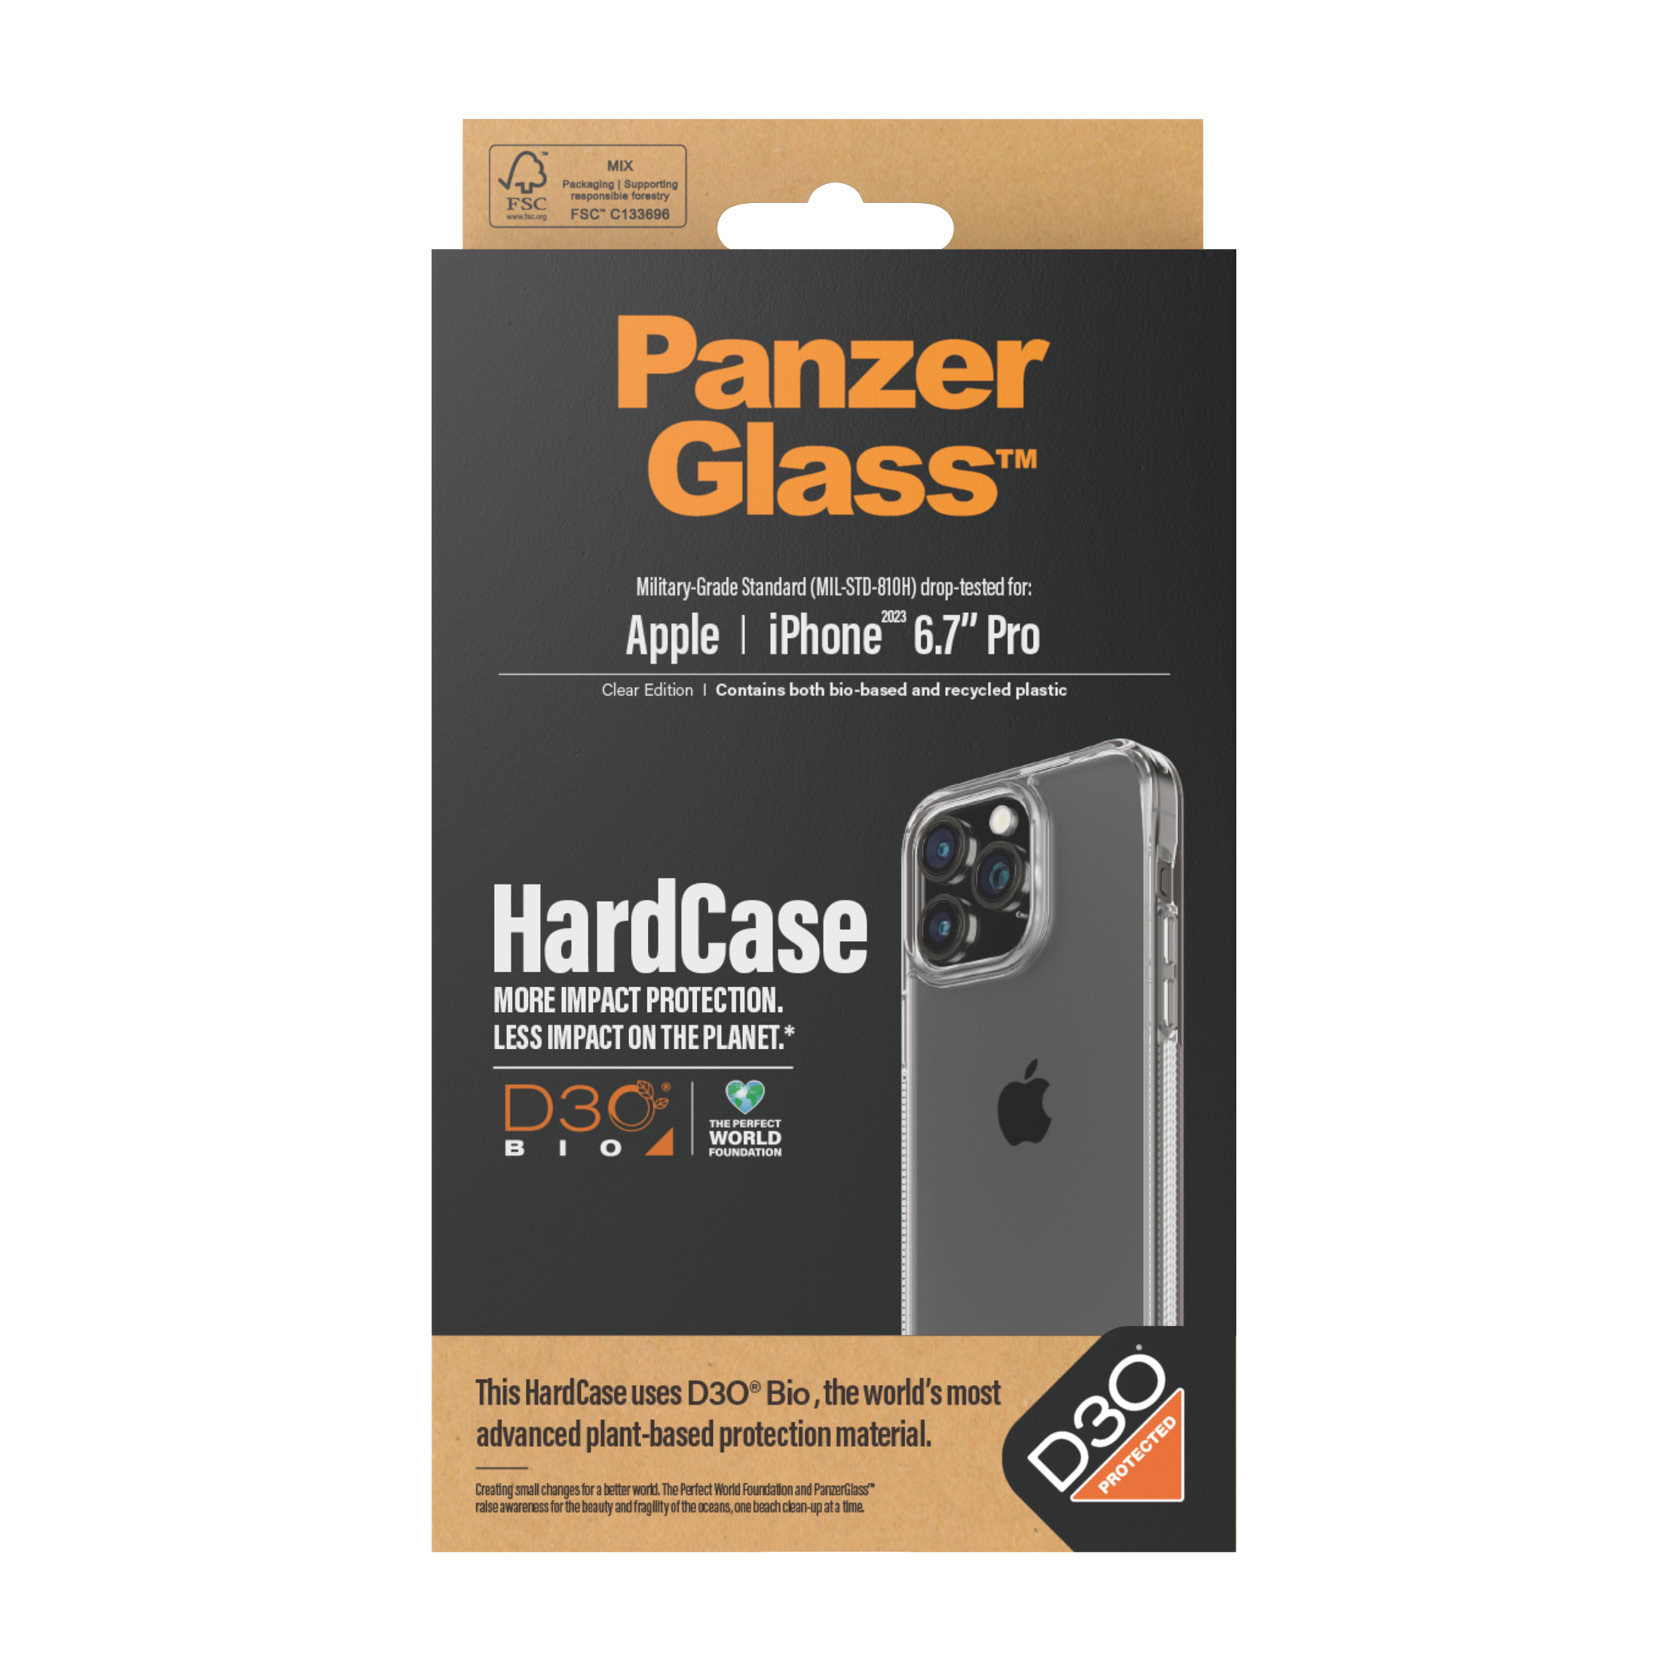 PanzerGlass iPhone 2023 6.7" Pro Max - Hardcase with D3O